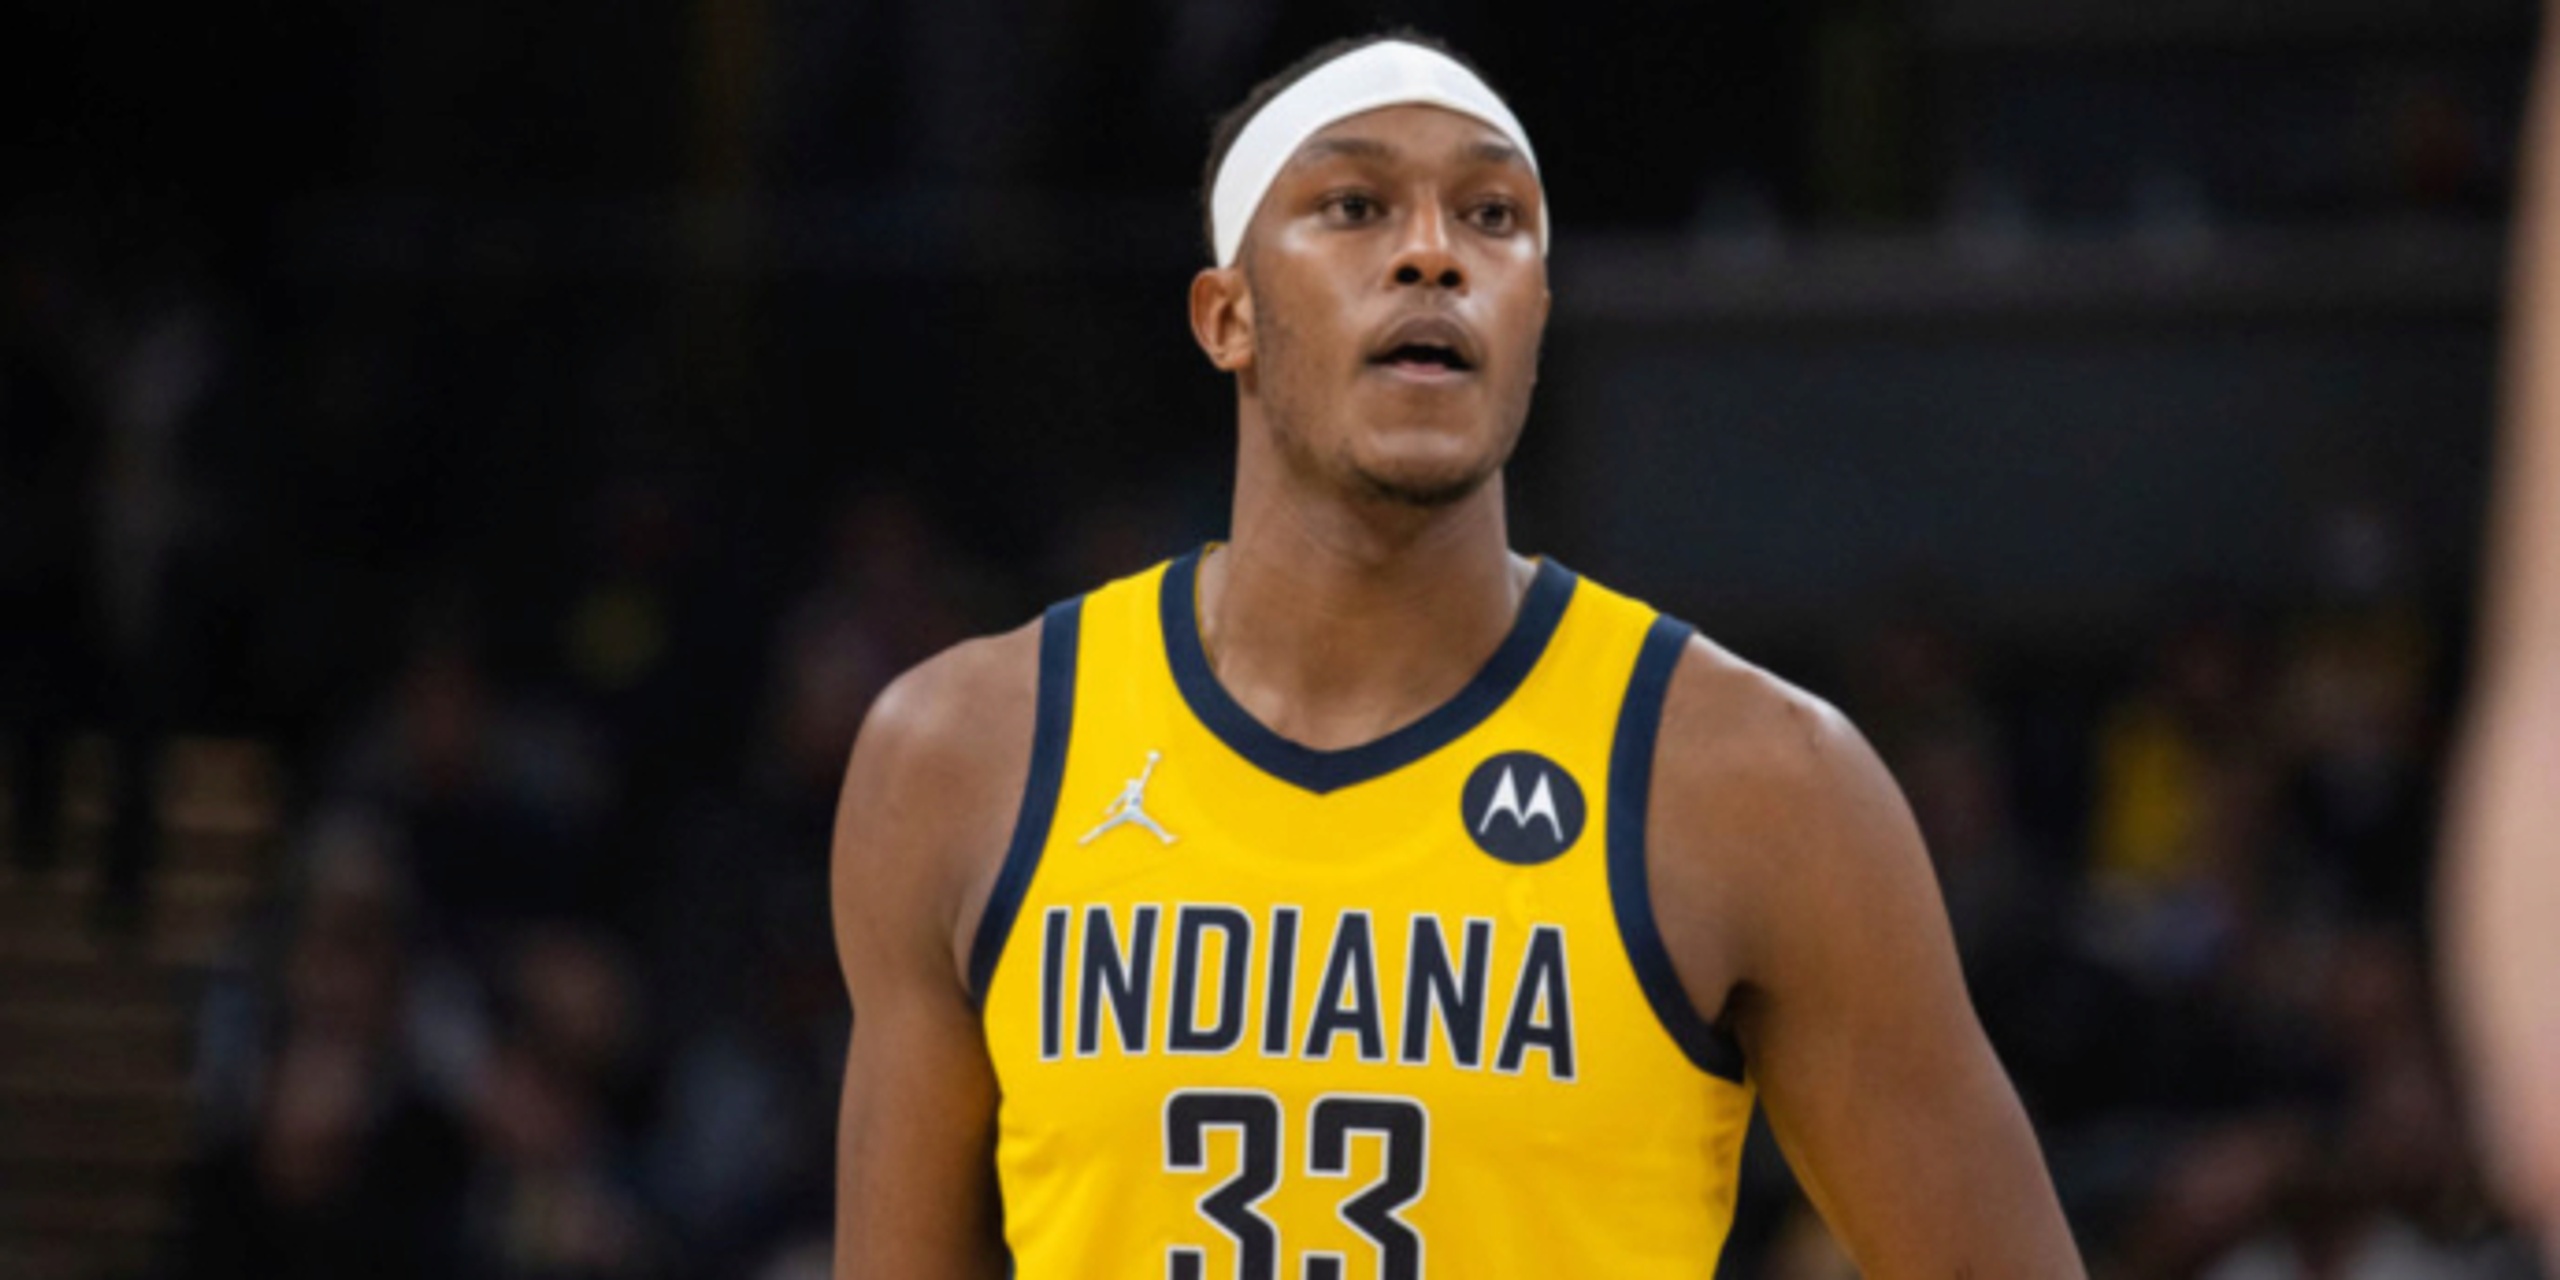 Despite trade talks, the Pacers want to keep Myles Turner long-term